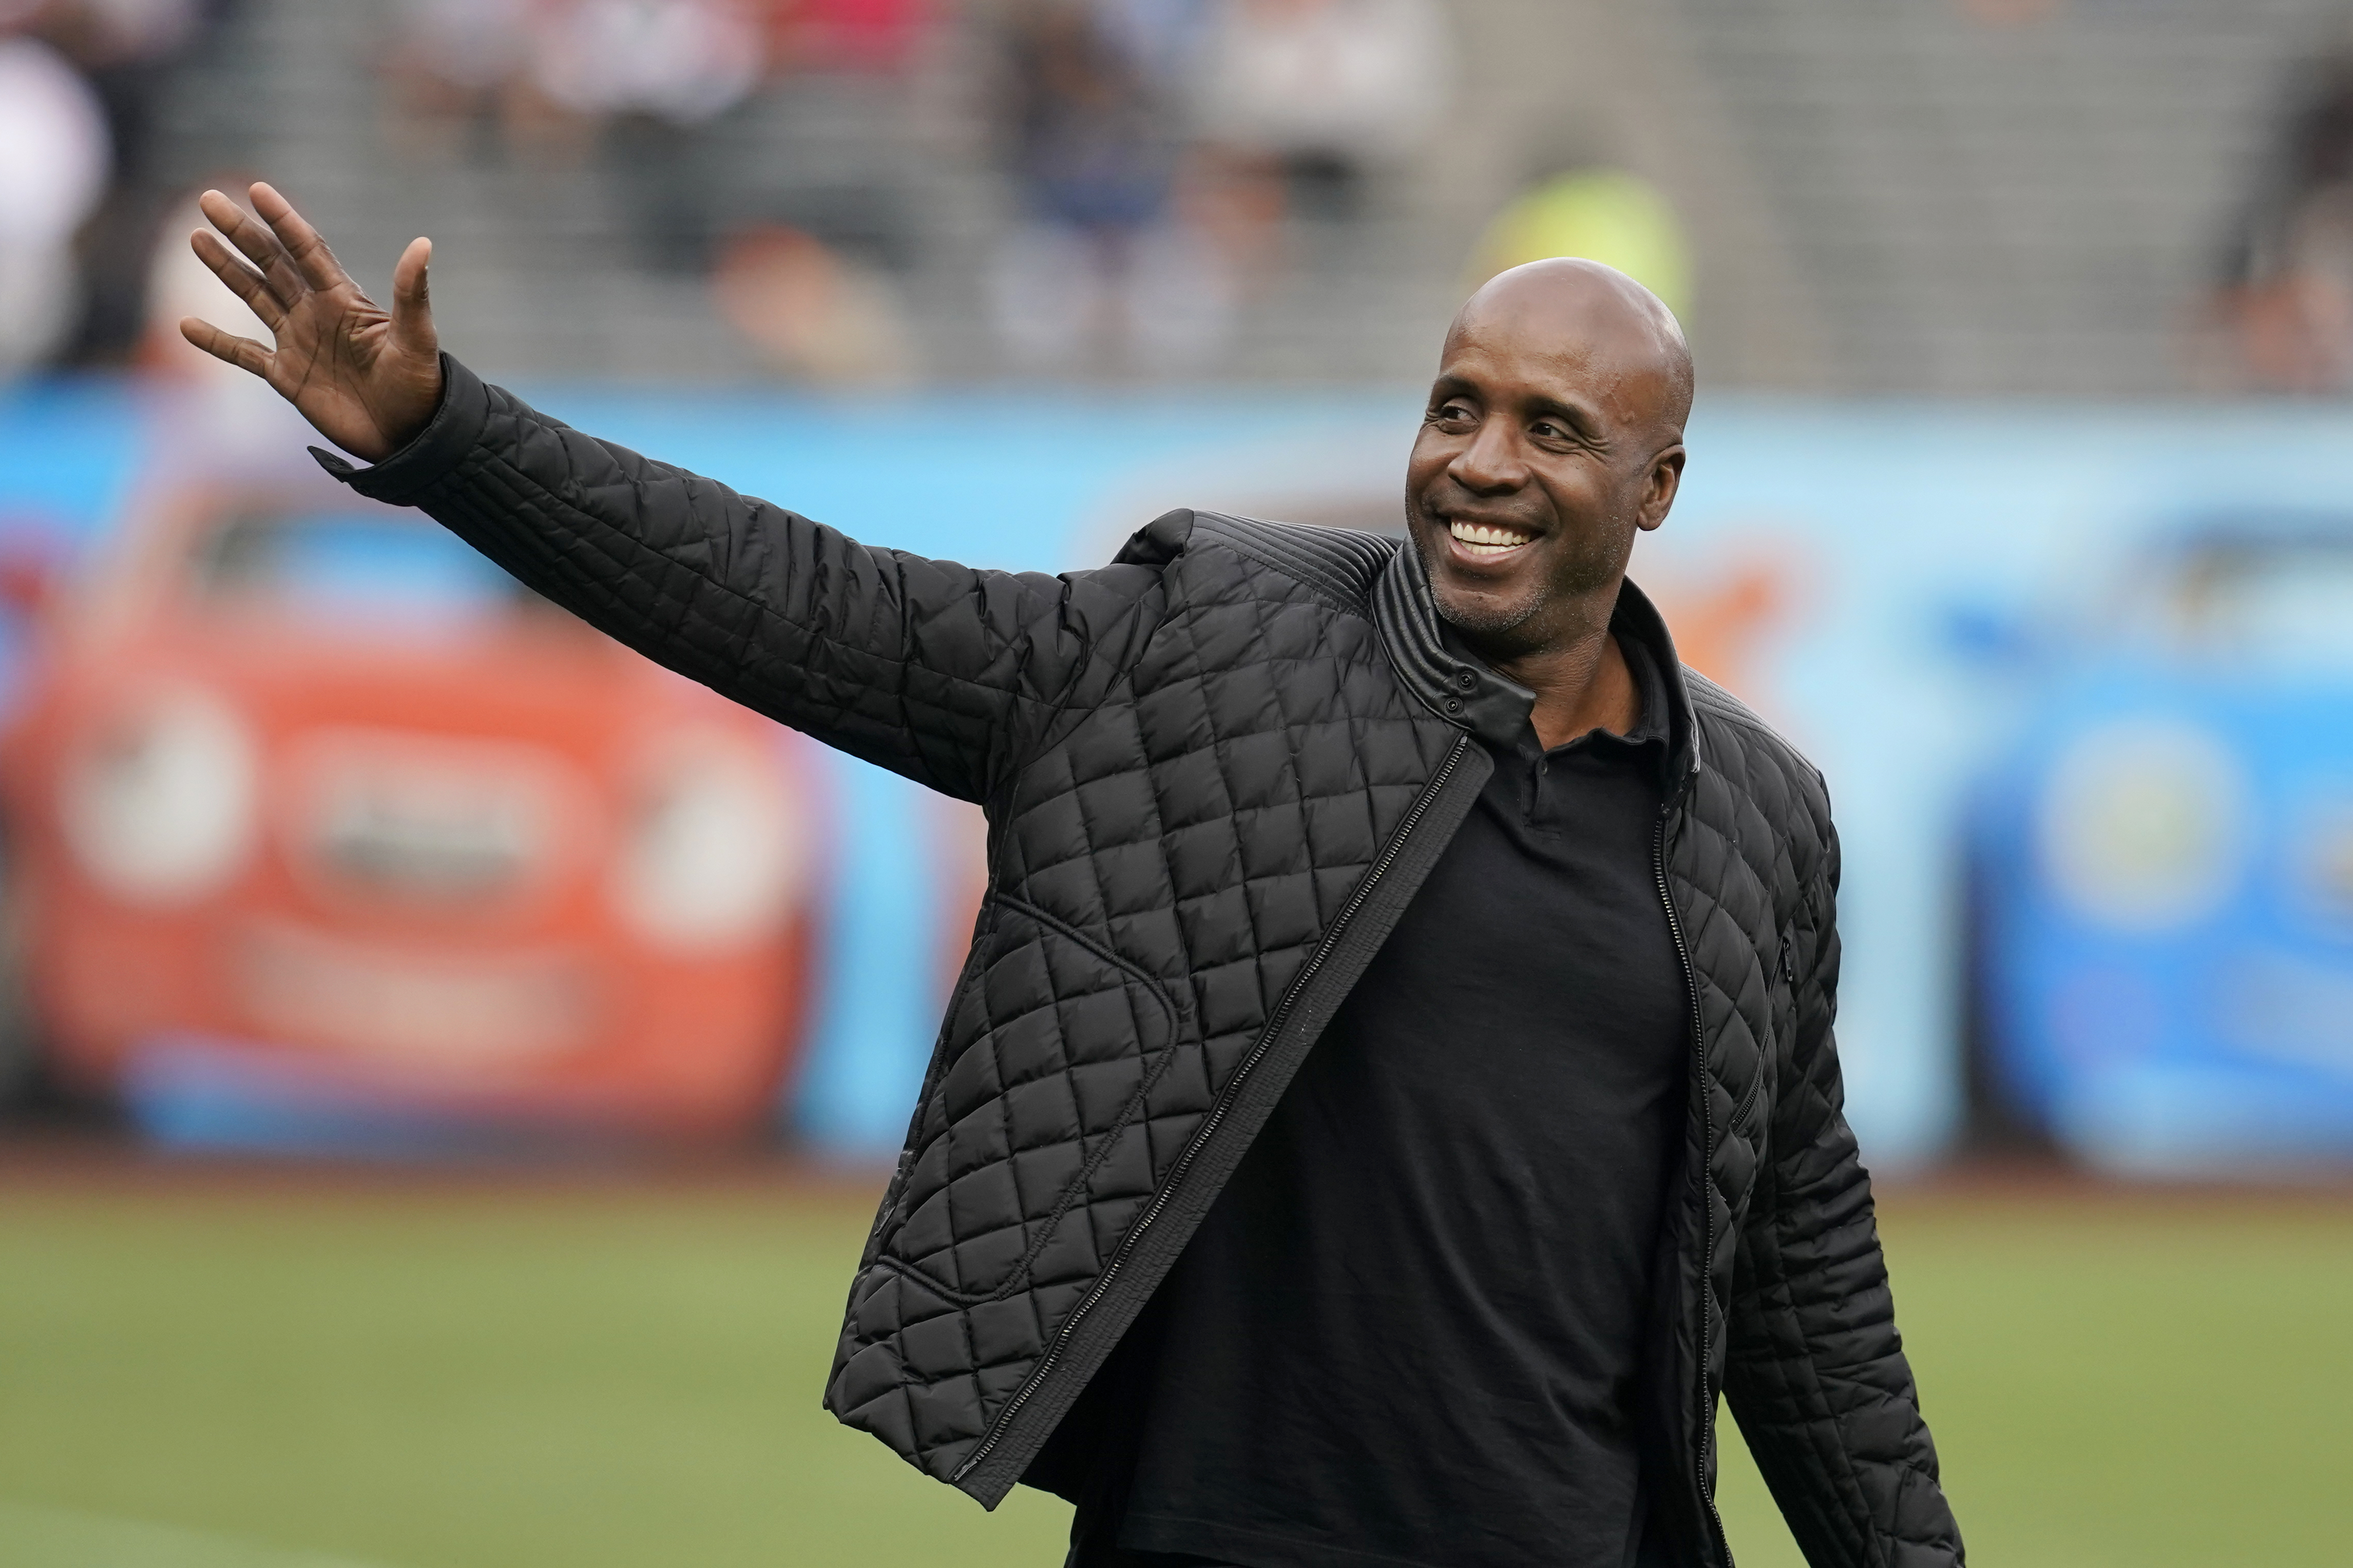 Home run king Barry Bonds obstruction conviction upheld – The